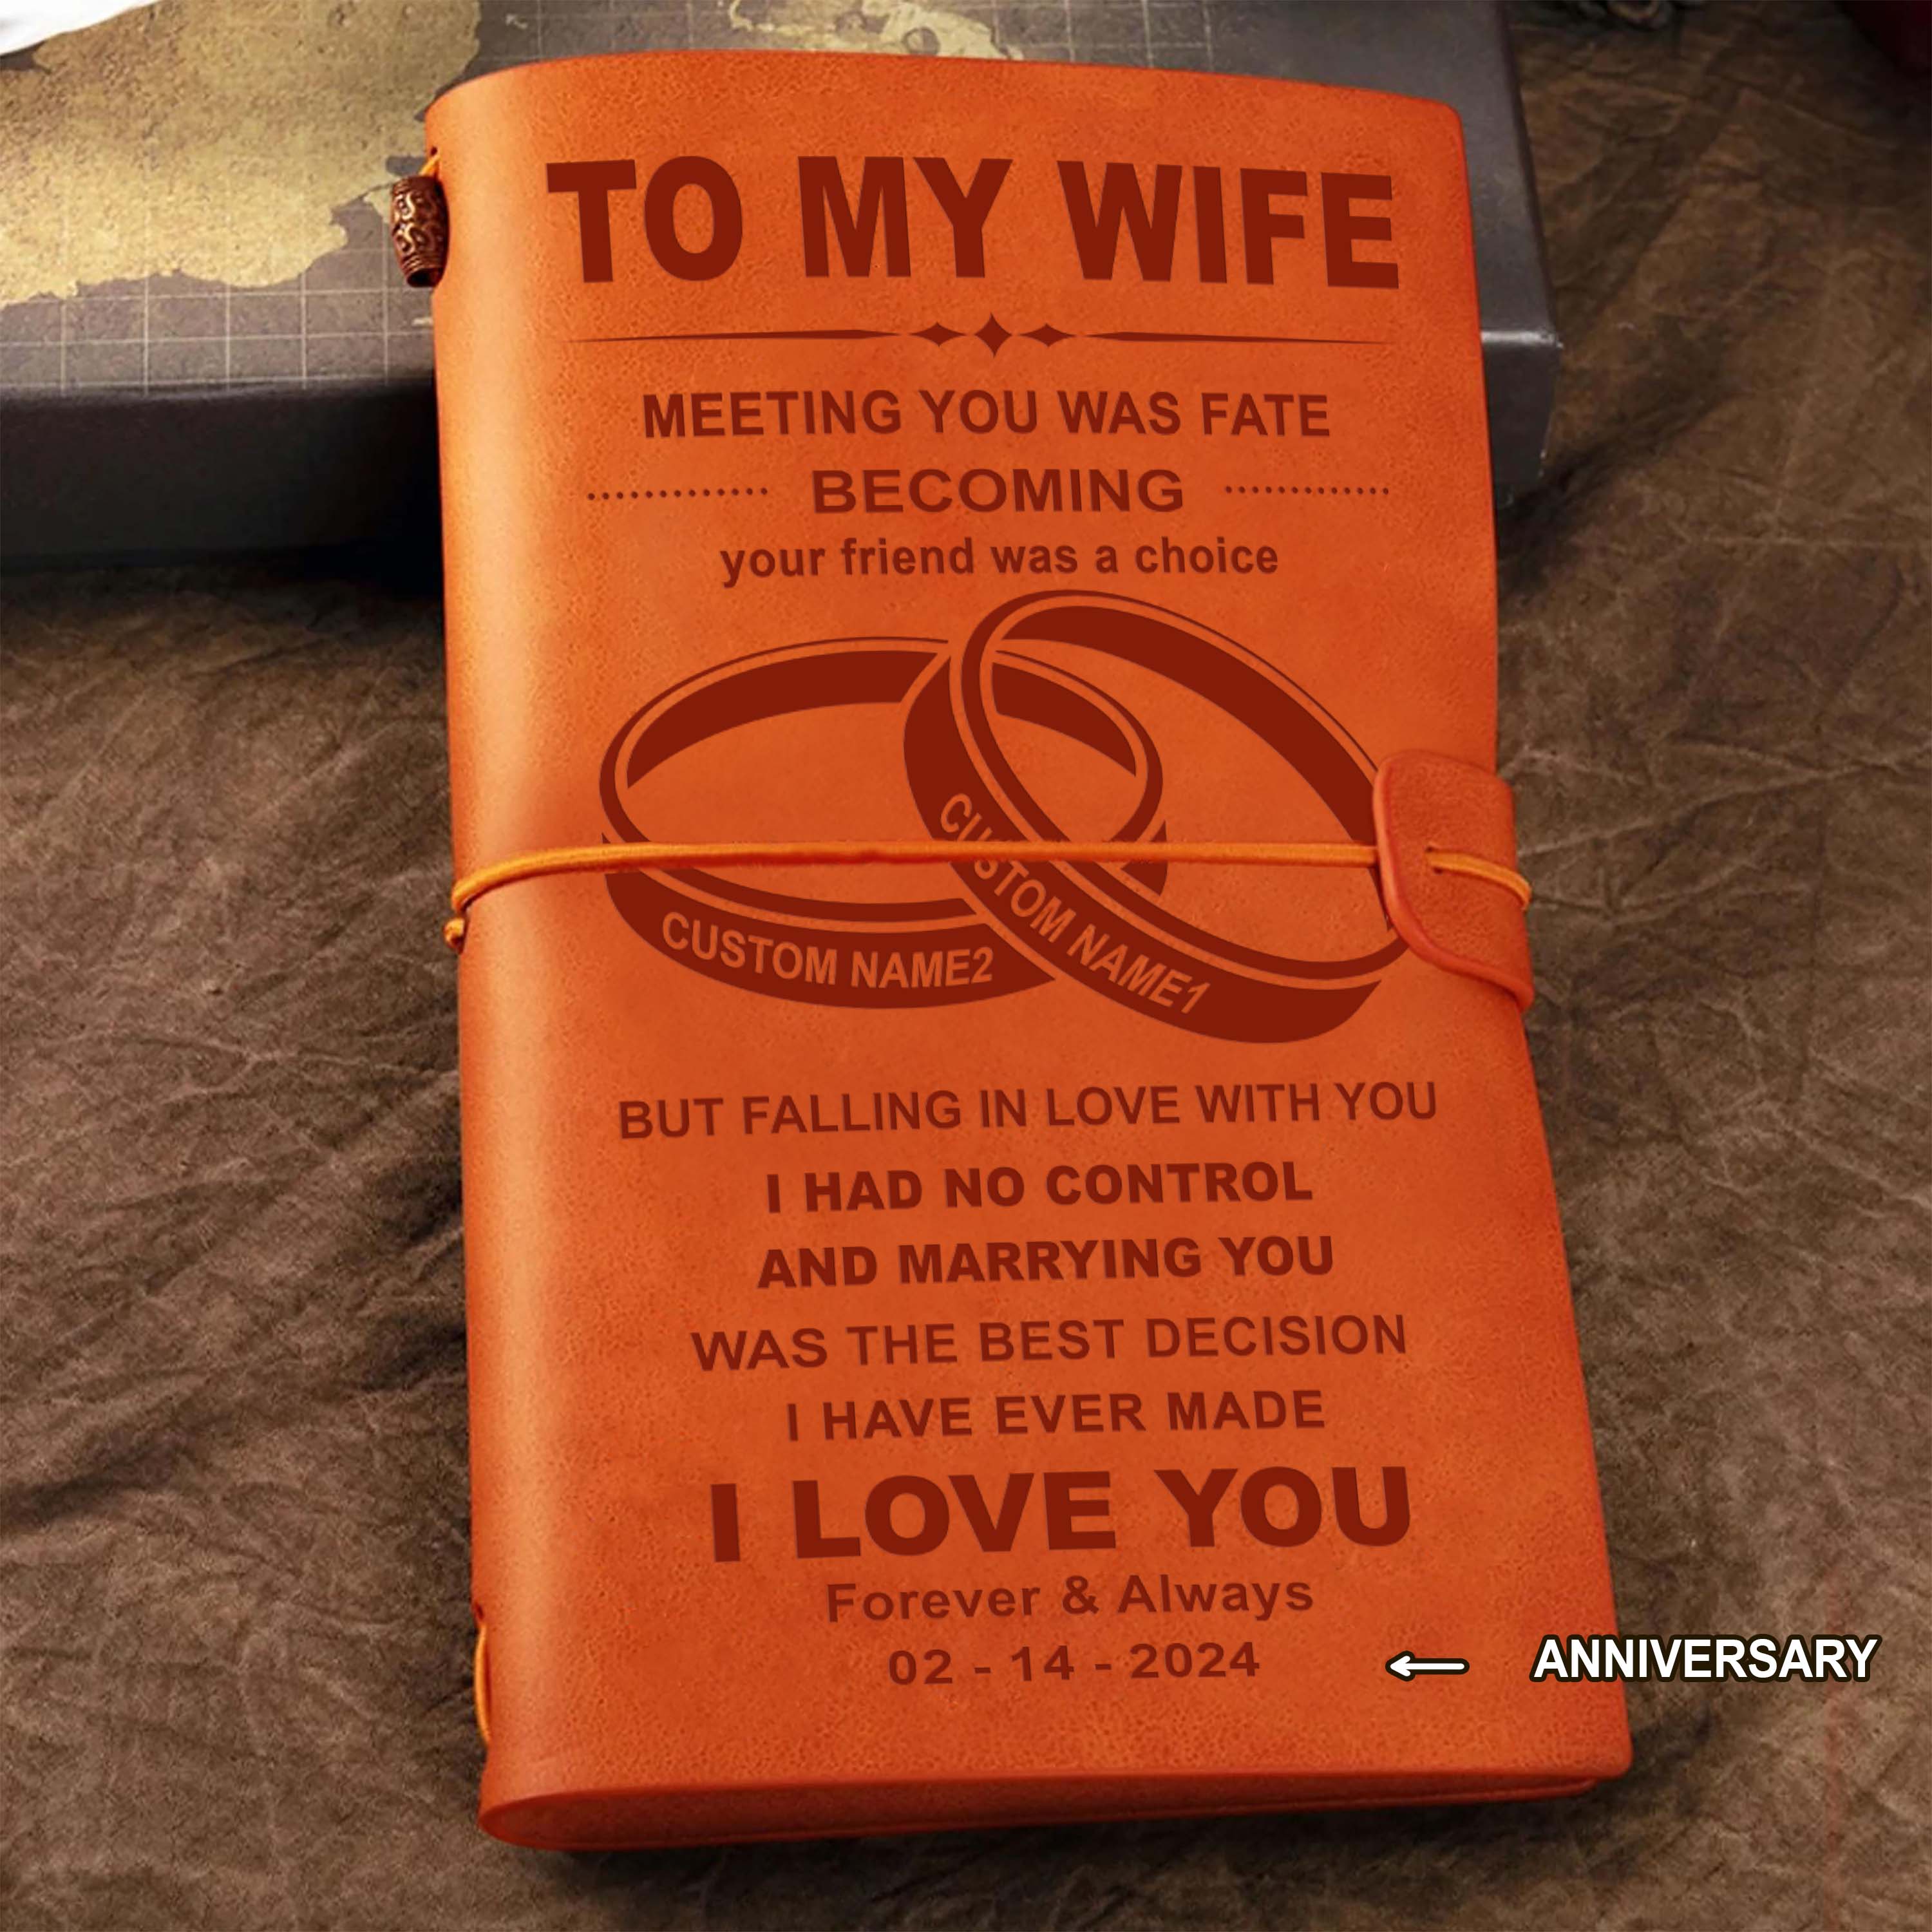 Valentines gifts-Vintage Journal Husband to wife- Meeting you was fate